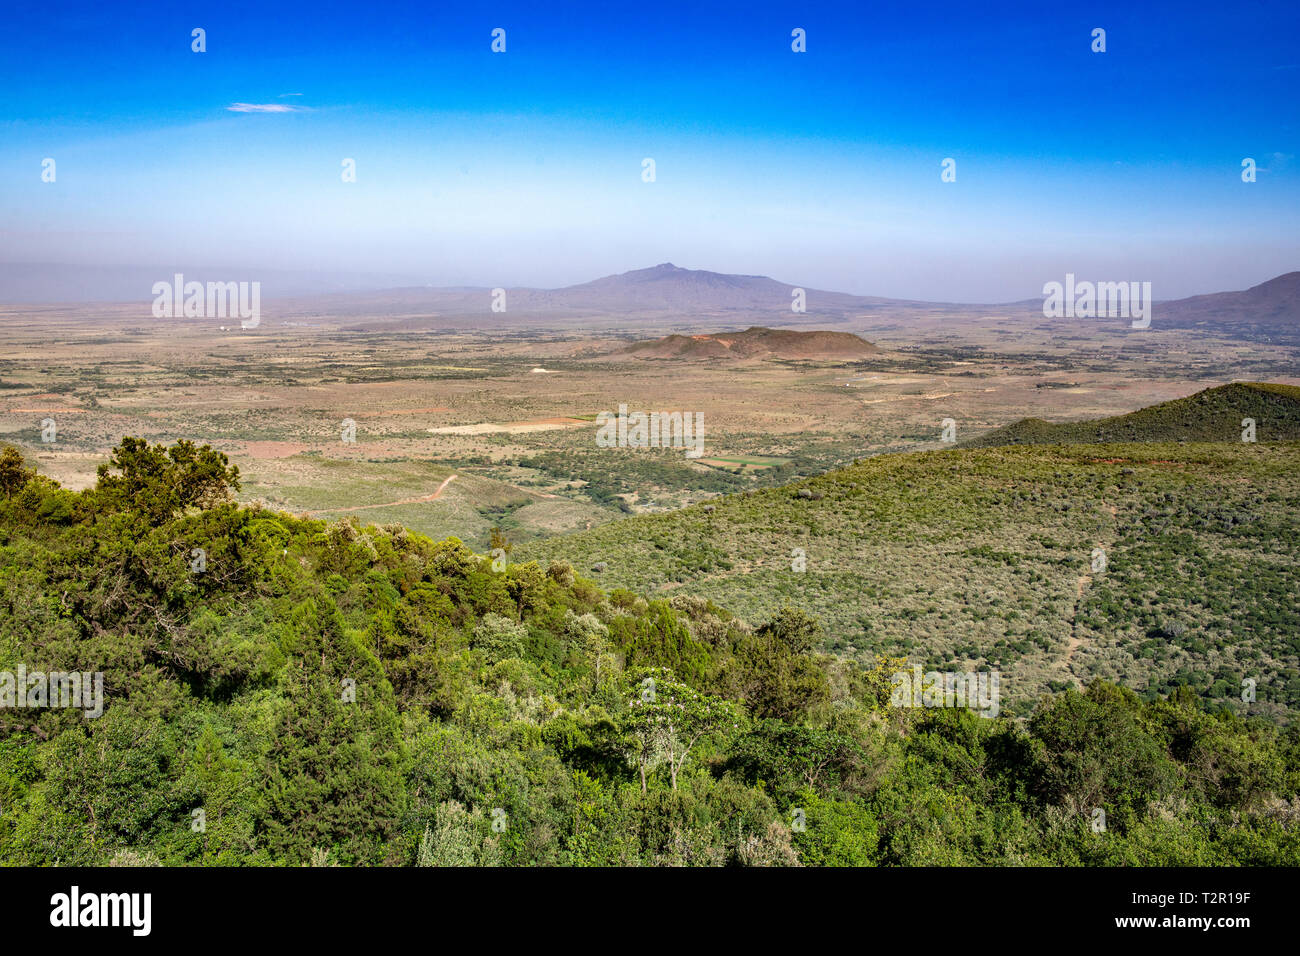 View overlooking the Great Rift Valley in Kenya Stock Photo